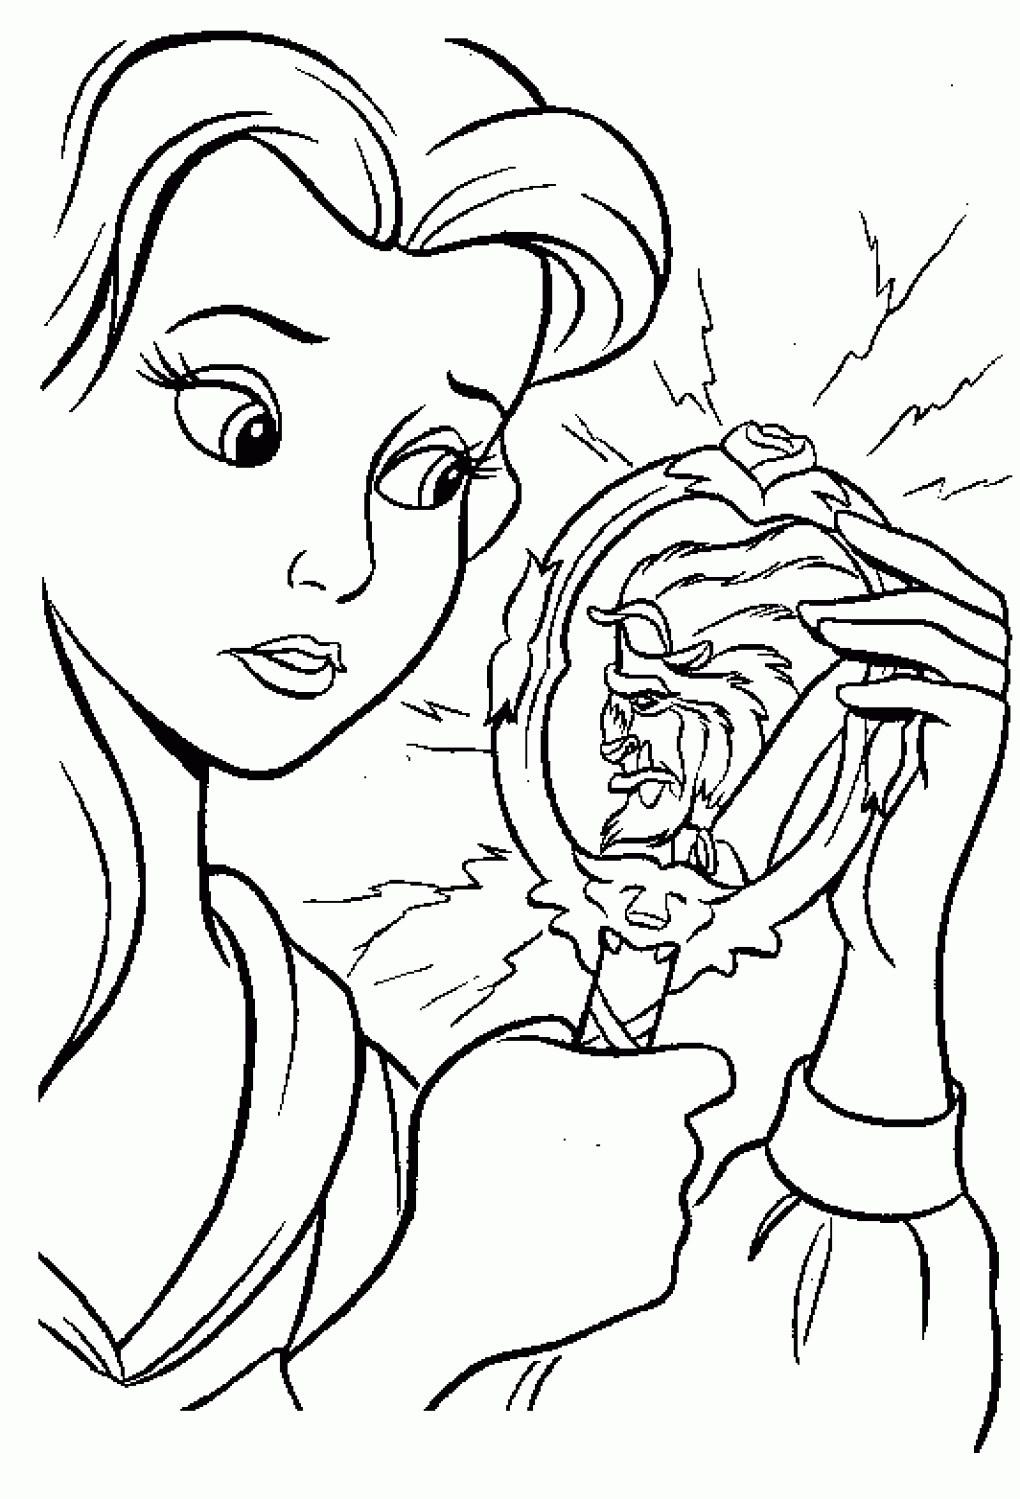 beauty and the beast coloring pages beauty and the beast coloring pages print and colorcom pages beast the beauty and coloring 